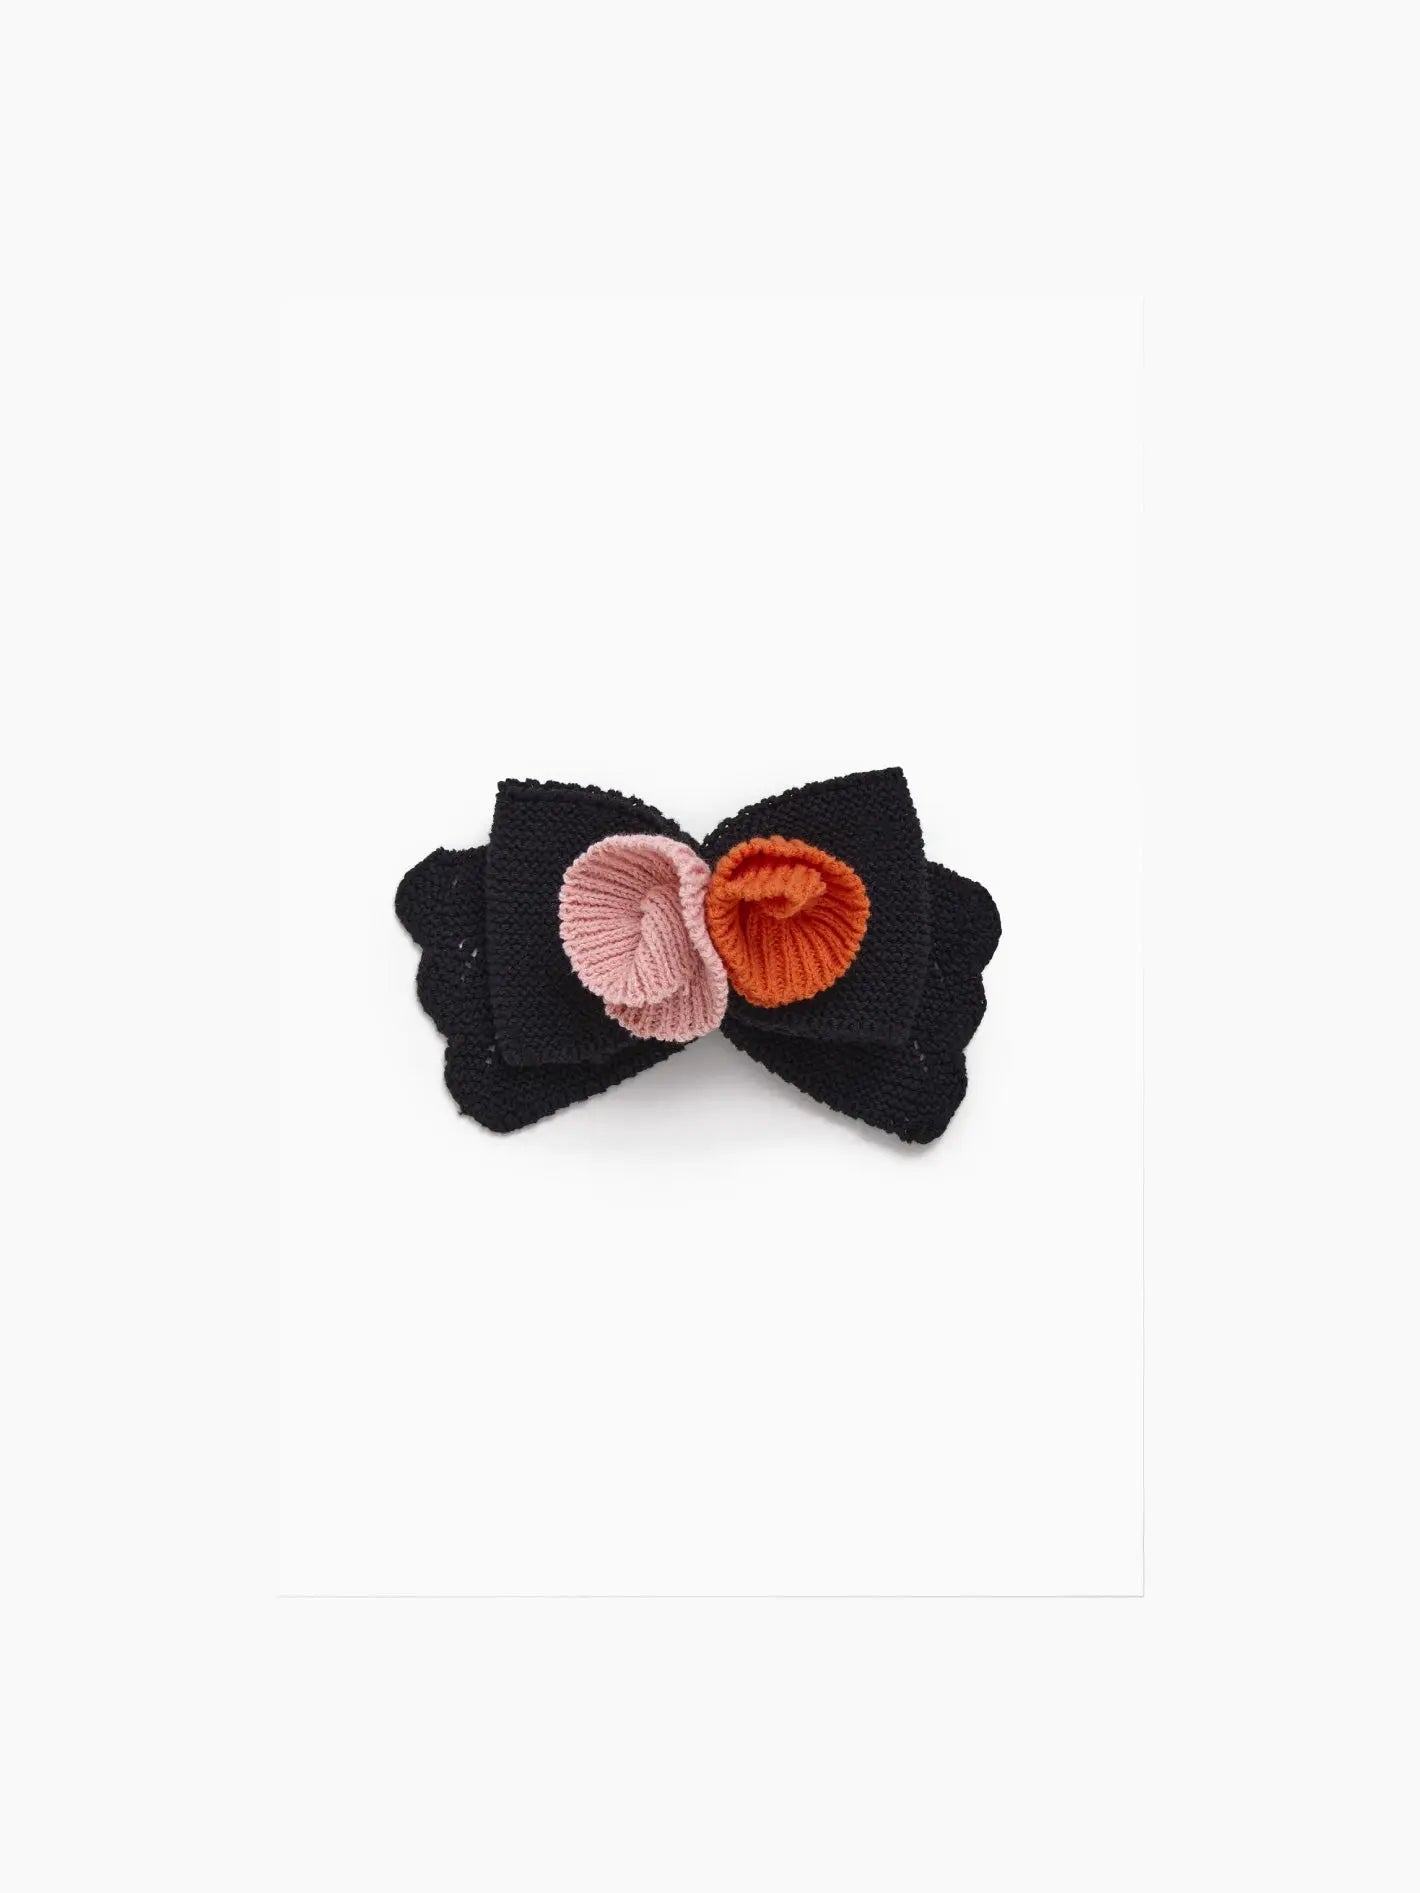 A Black Bow Hairclip with scalloped edges, adorned with two small circular embroidered flowers in pink and orange at the center, perfectly captures the charm of Barcelona. This lovely accessory from Tomasa is set against a plain white background.